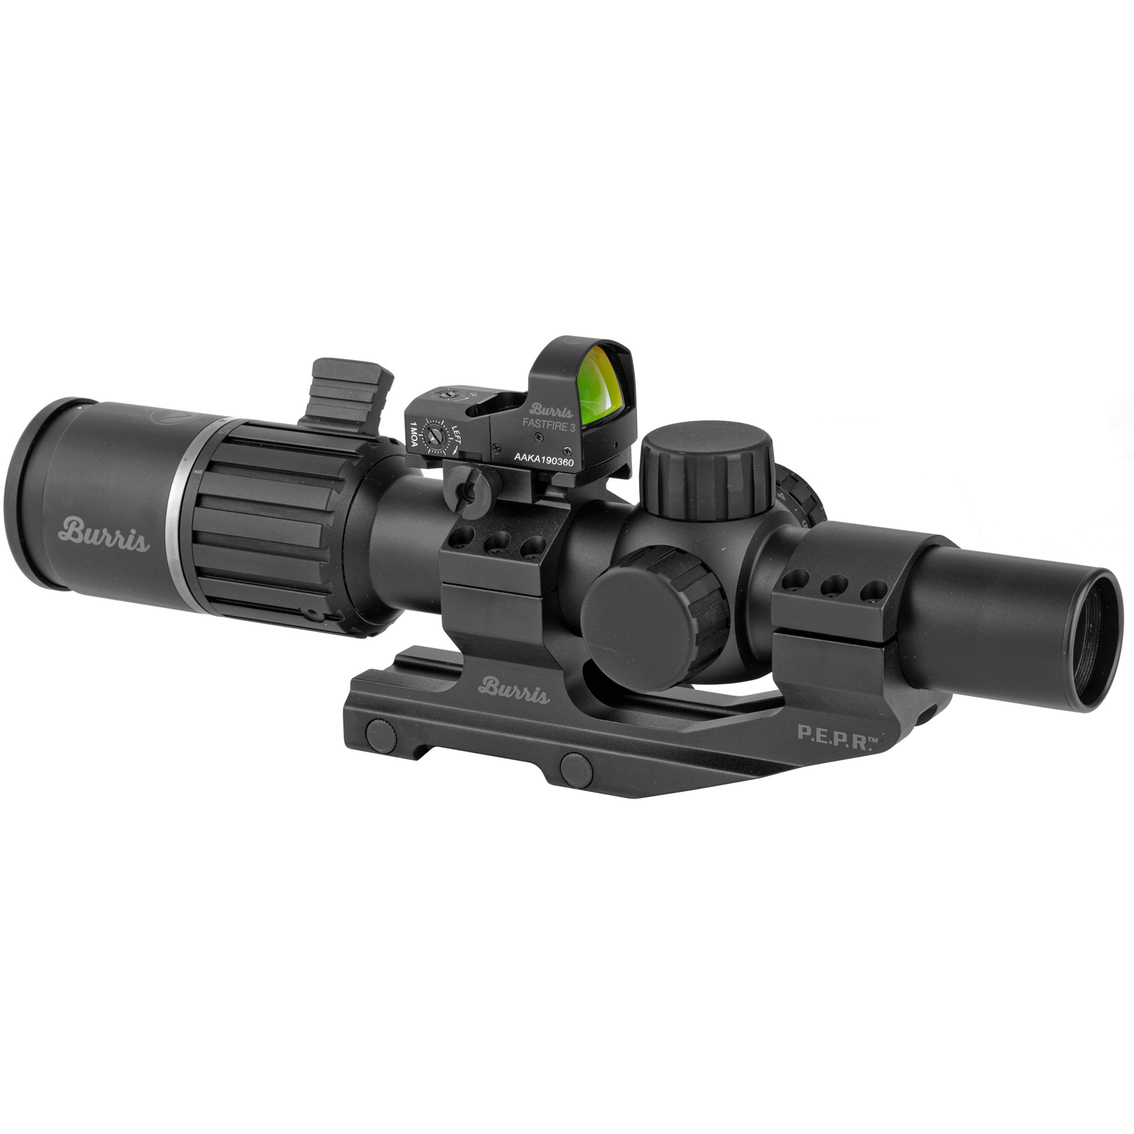 Burris RT6 Rifle Scope 1-6x24mm with FastFire 3 Red Dot Sight & Mount - Image 2 of 4